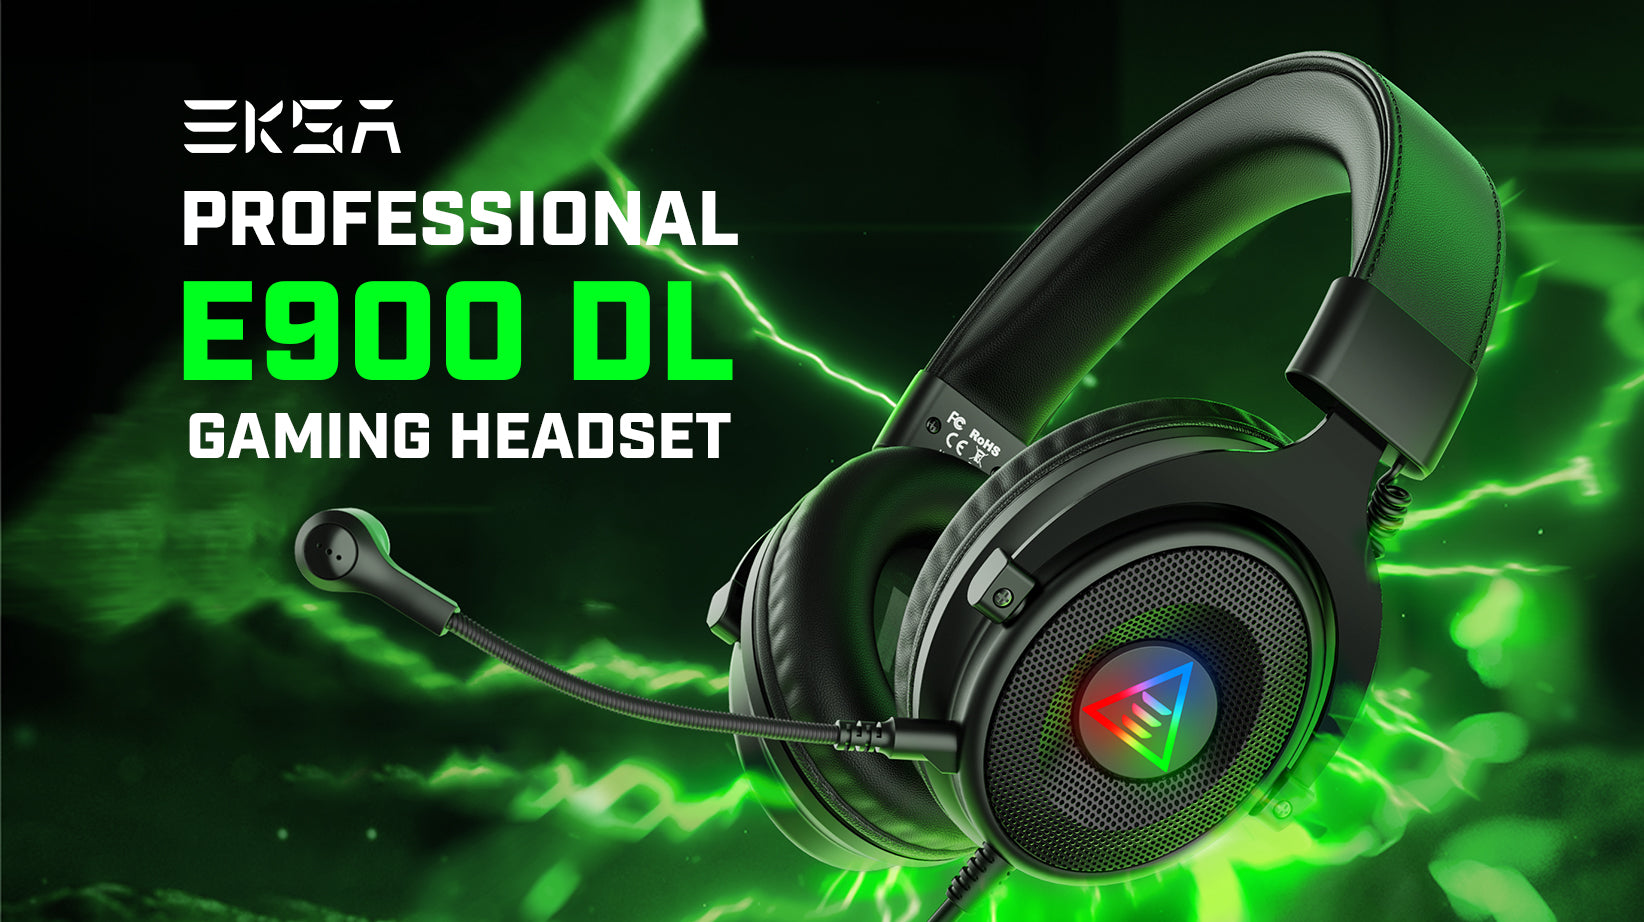 E900DL Wired Stereo Gaming Headset-Over Ear Headphones